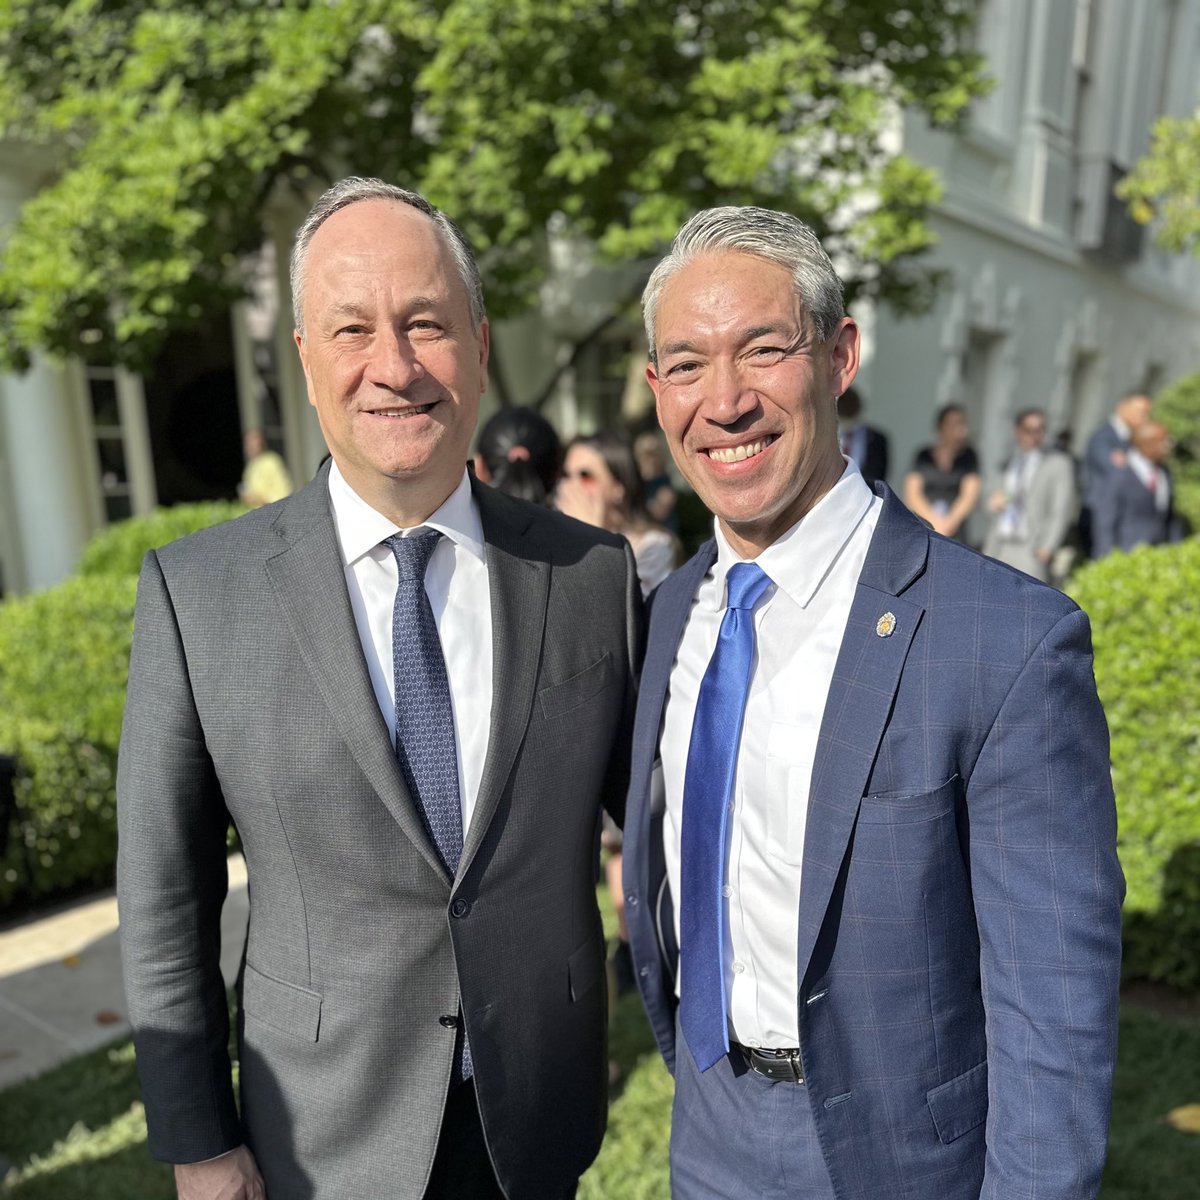 Honored to be at the @WhiteHouse to celebrate #AANHPIHeritageMonth!

As San Antonio’s first mayor of Asian-American descent, I’m grateful for an administration that recognizes the contributions of all our communities.